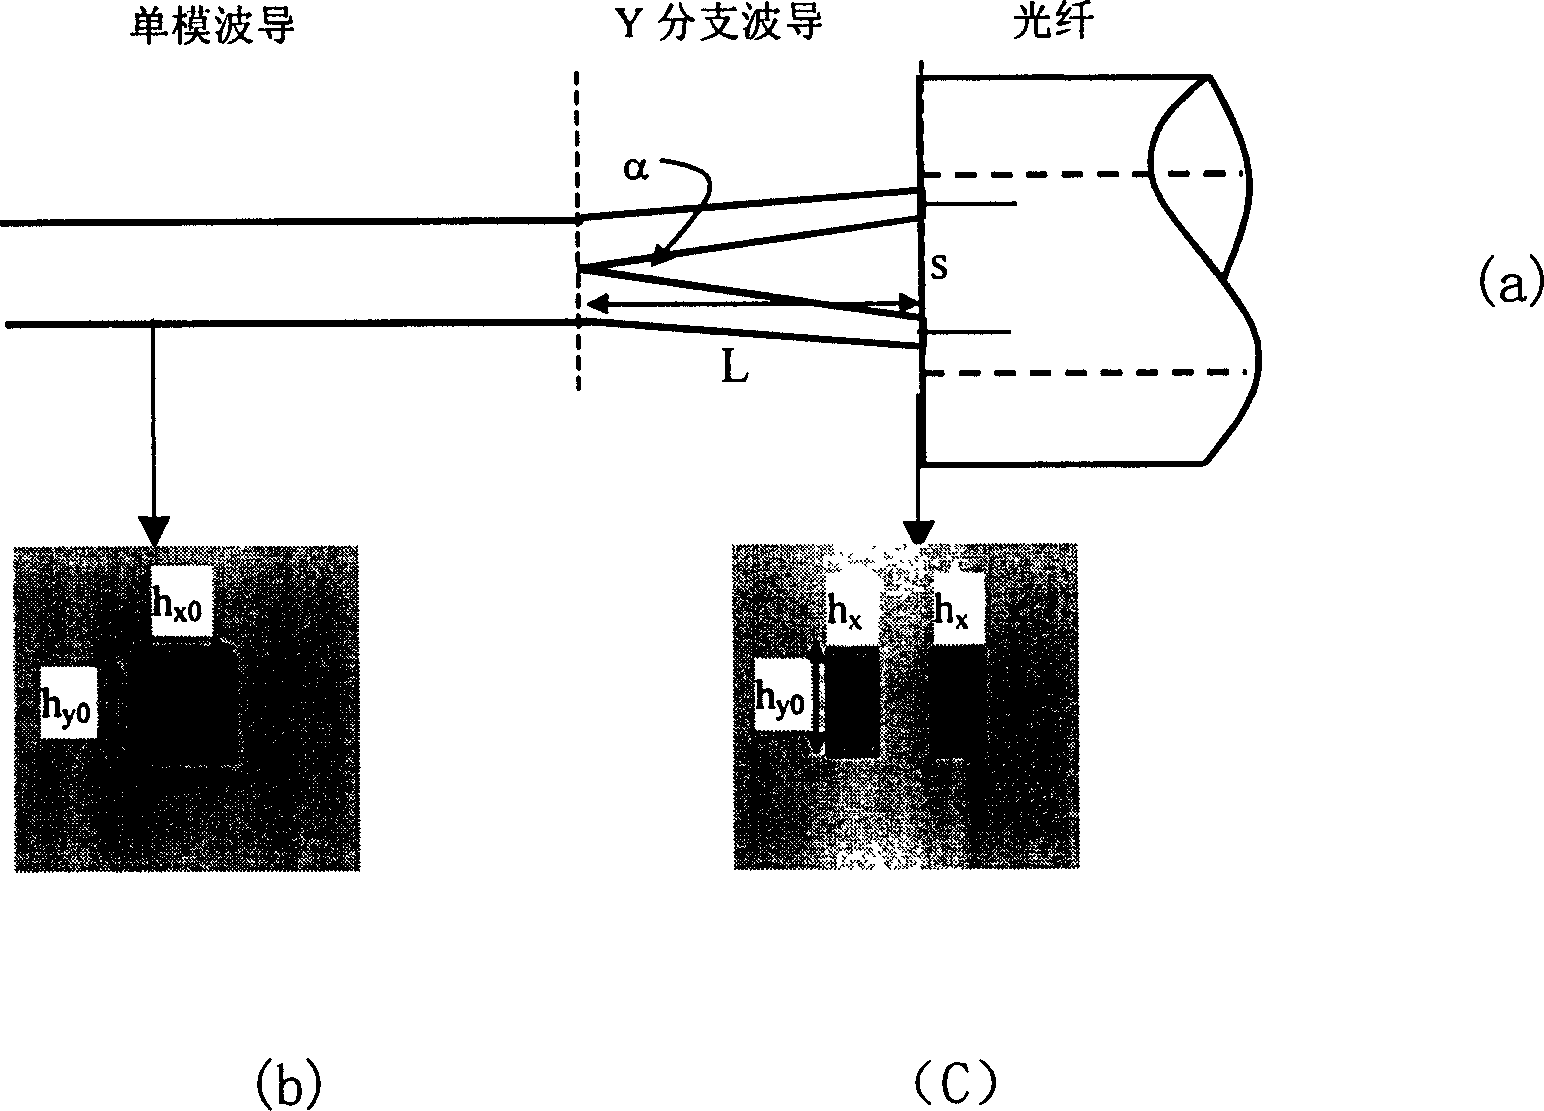 Plant waveguide and optical fibre low-loss connecting method